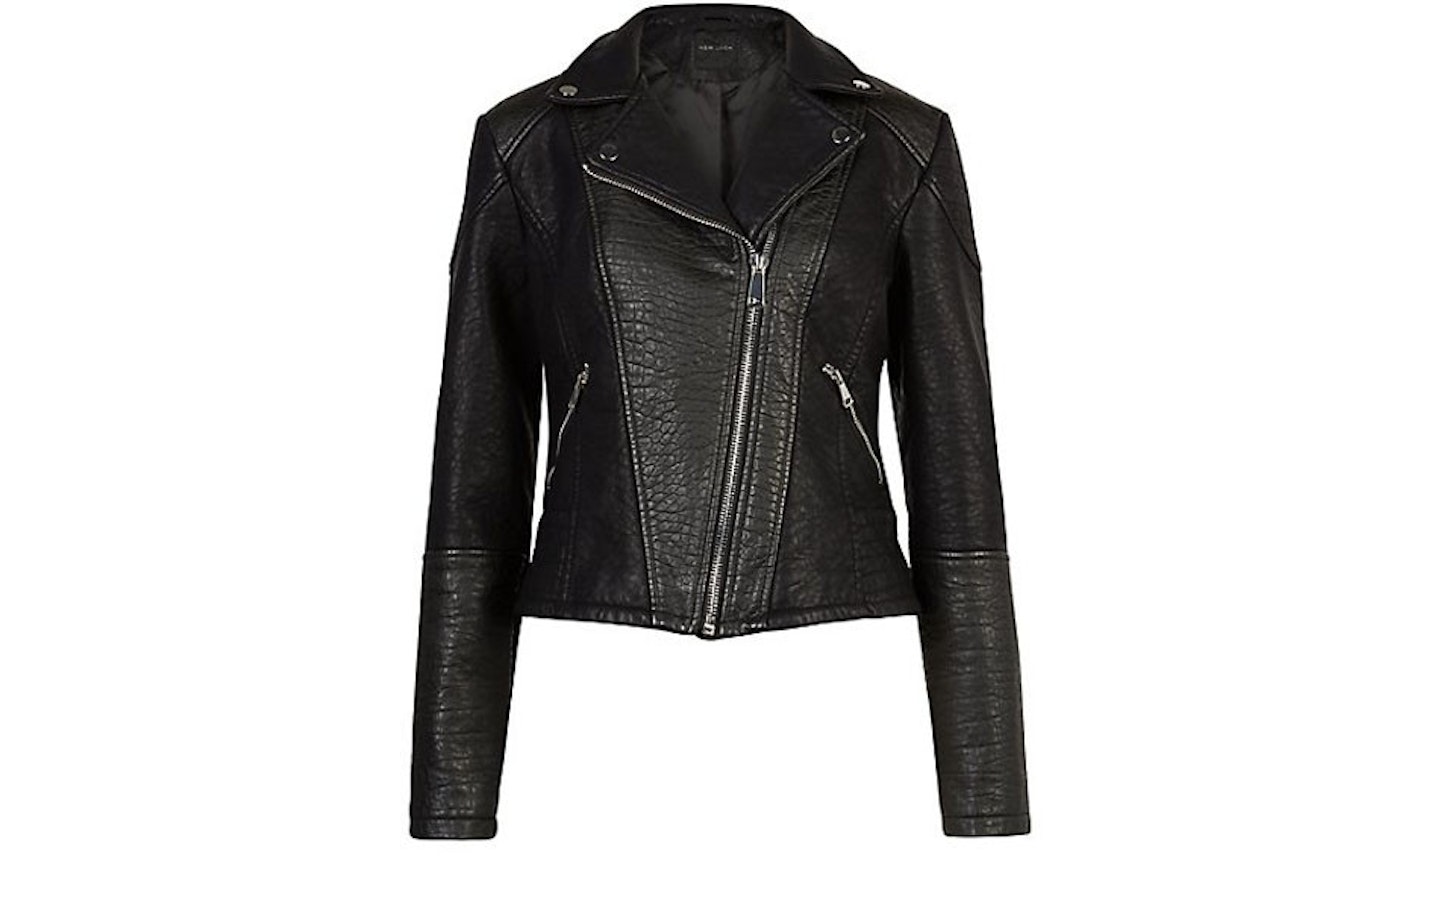 From New Look: Black Leather-Look Textured Biker Jacket, £44.99.